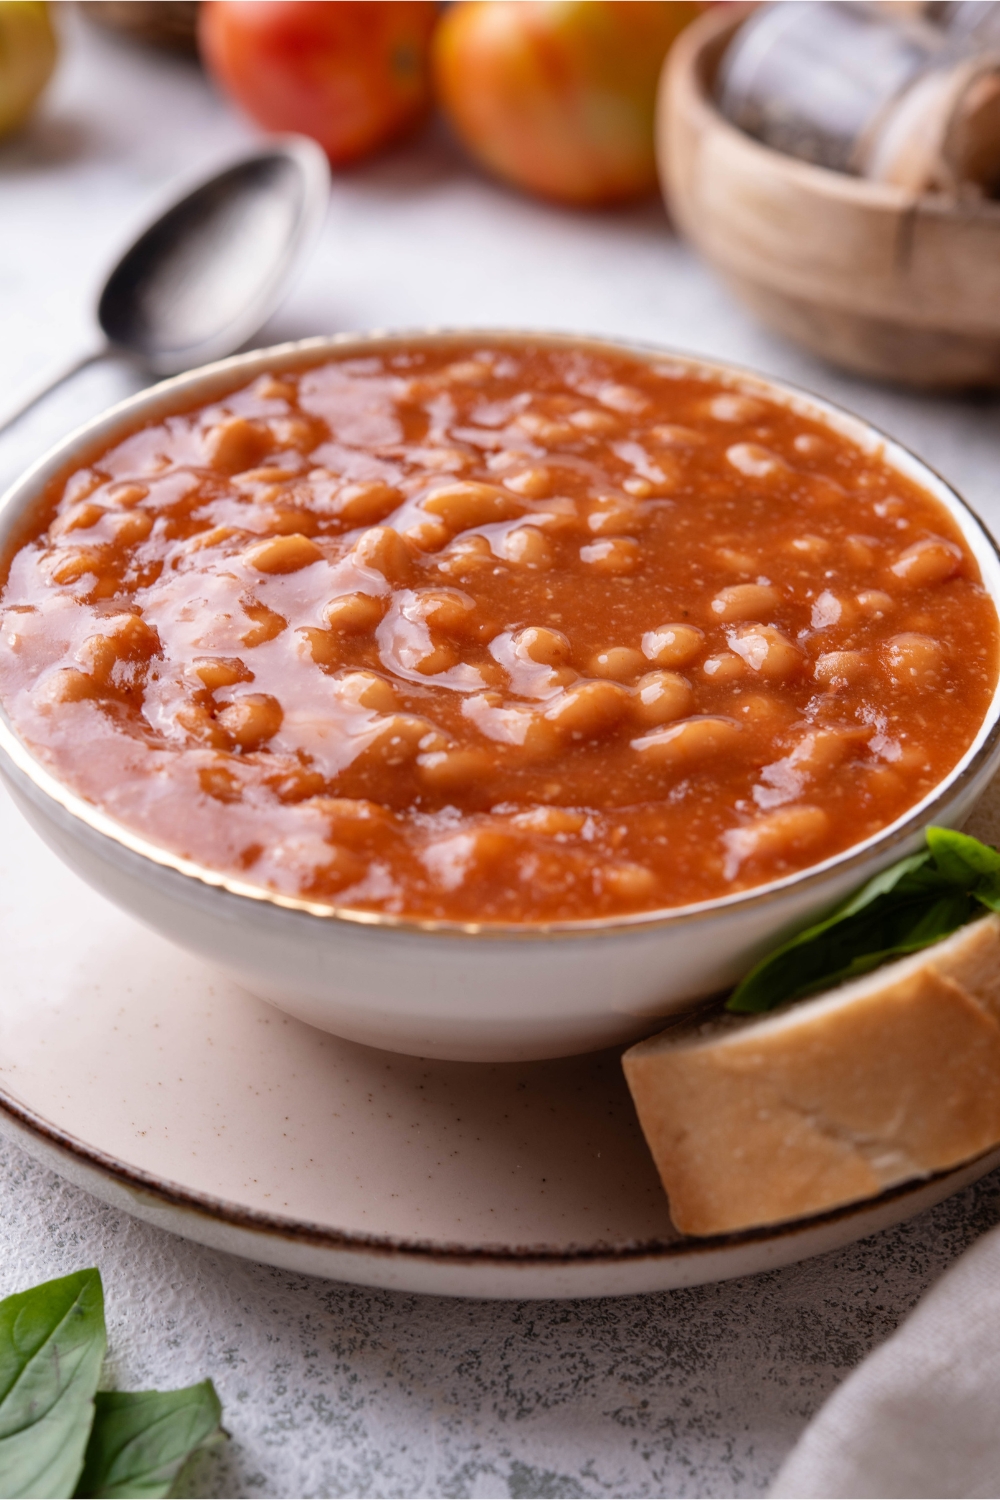 Baked beans in a white bowl.